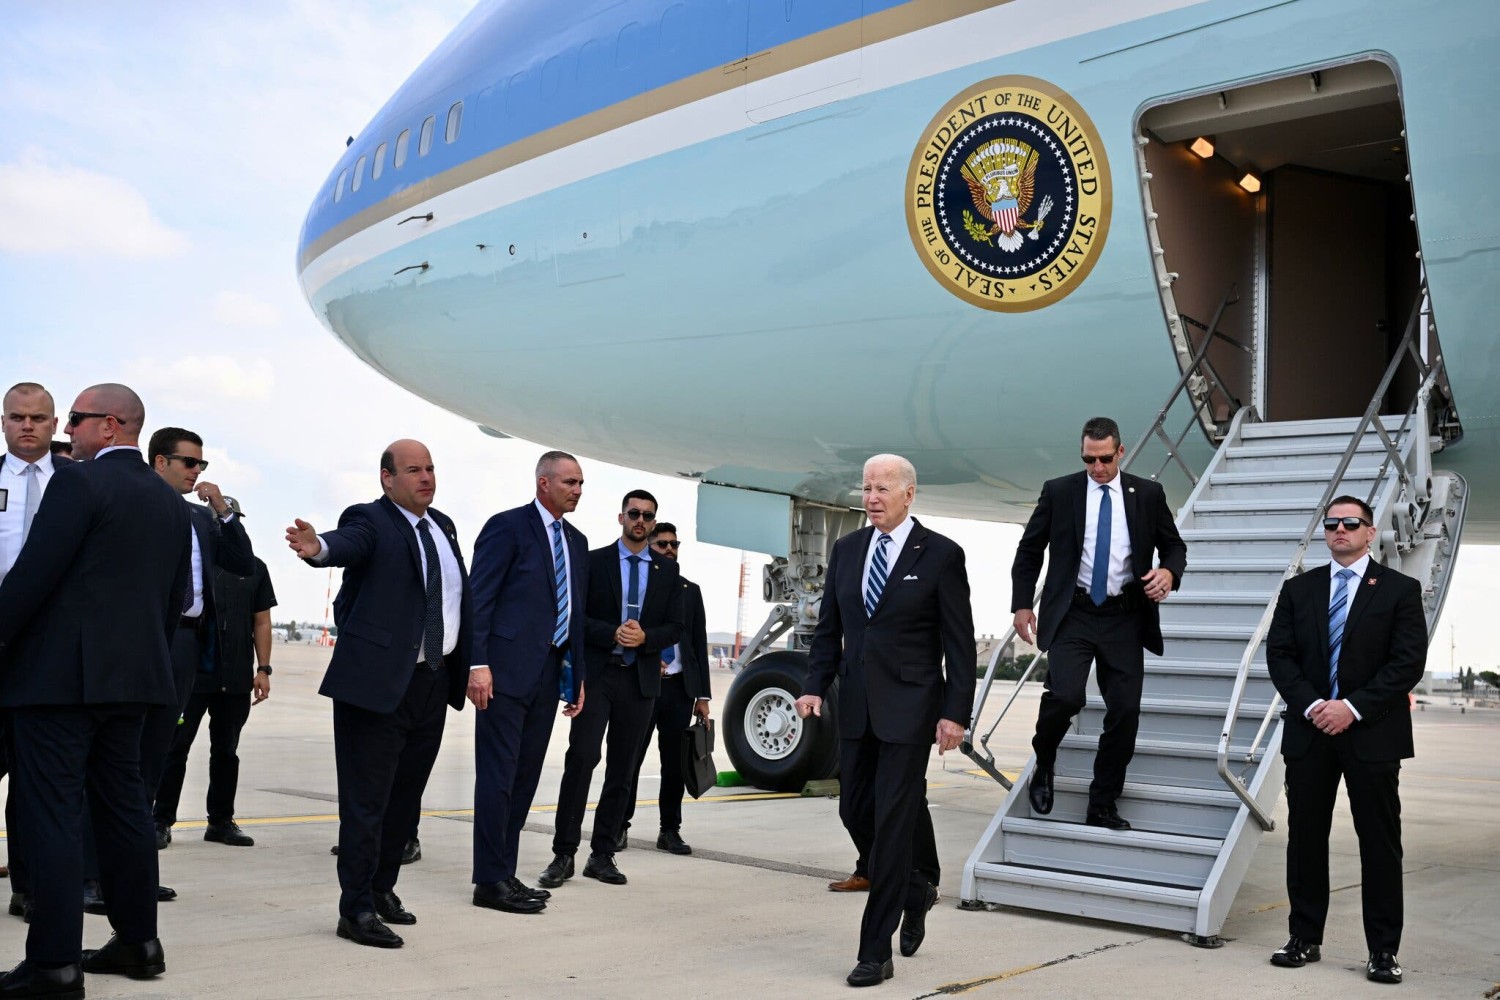 President Biden arrived in Israel on Wednesday to show solidarity with Washington’s close ally in the Middle East.Credit...Kenny Holston/The New York Times